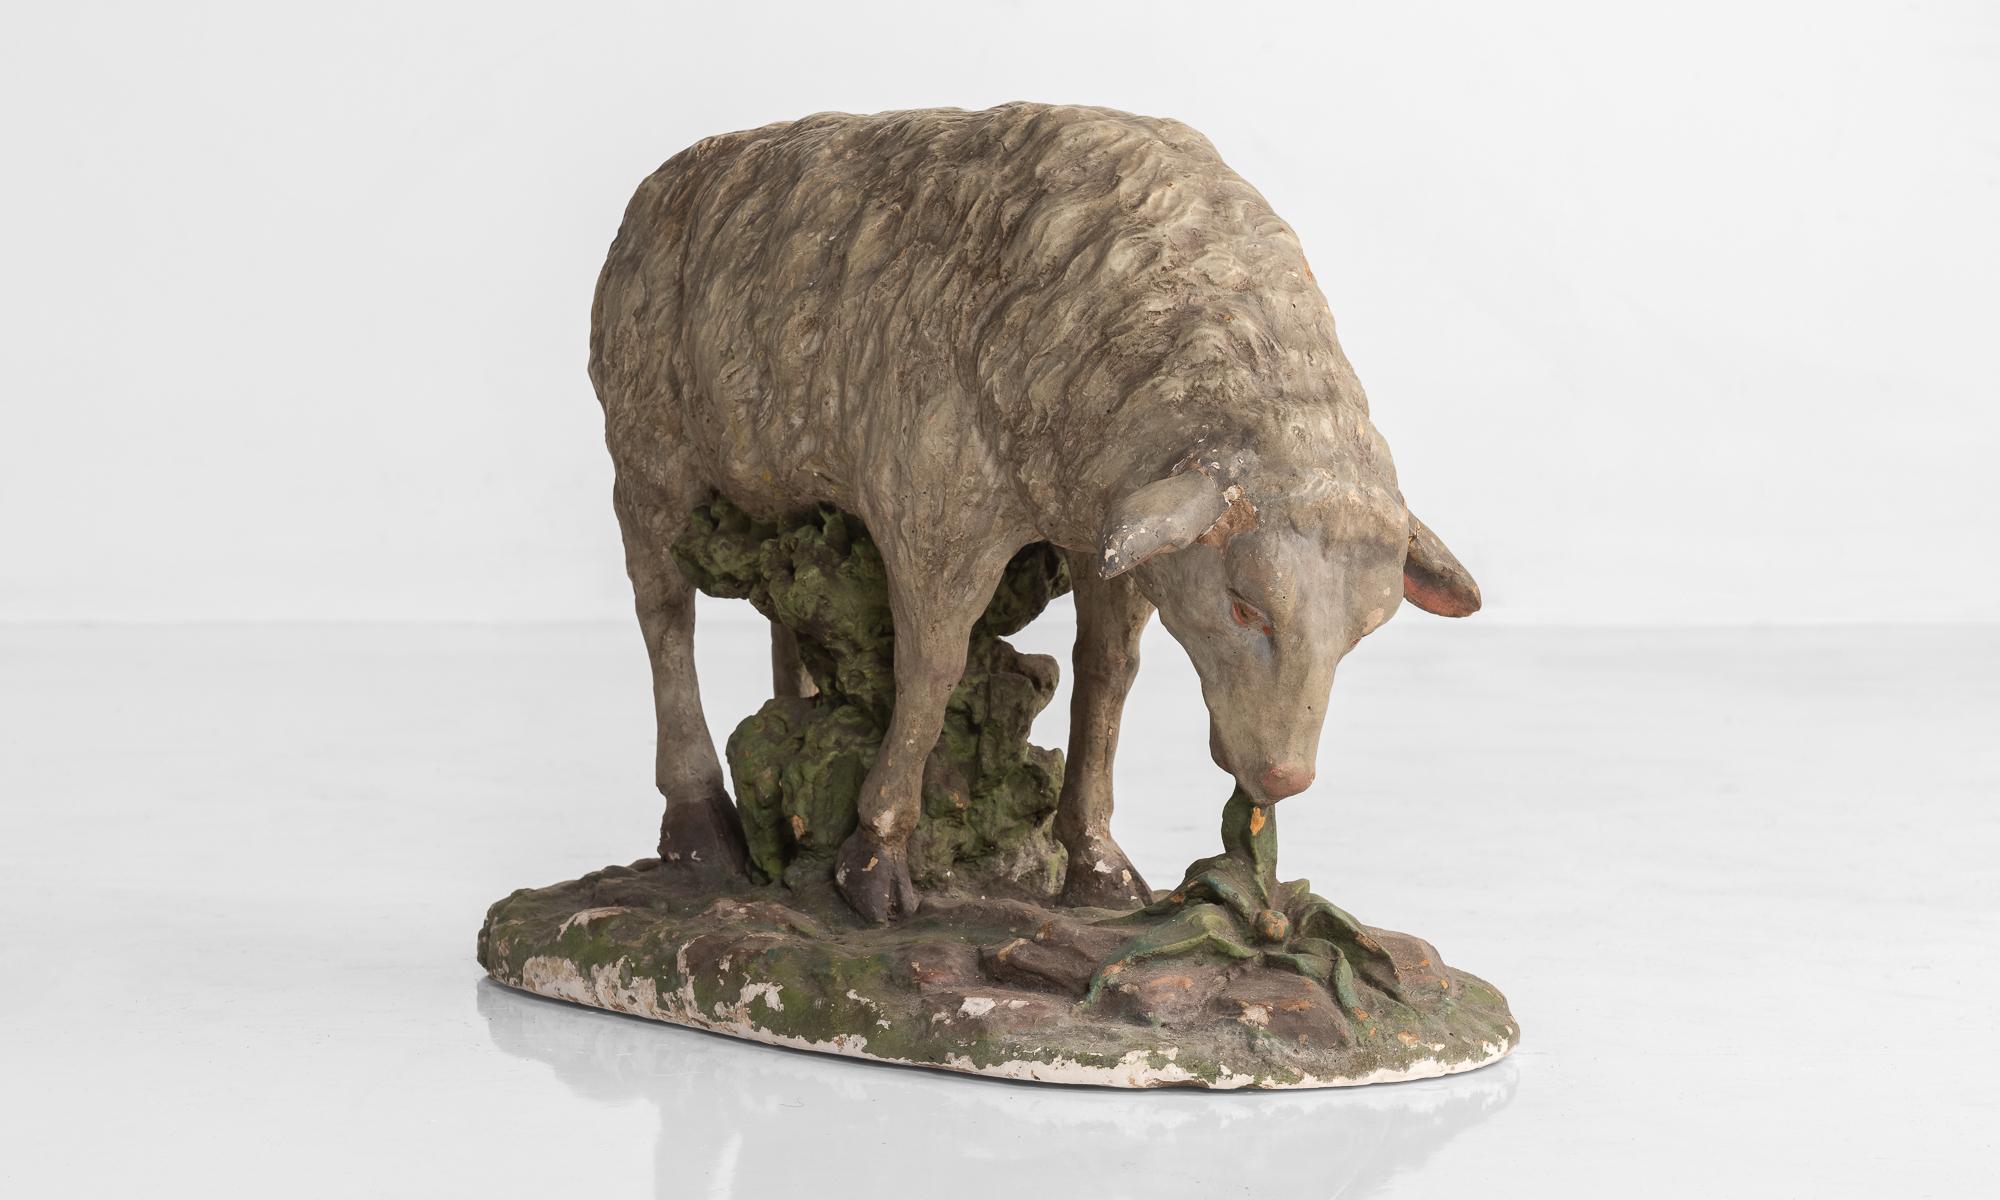 Plaster sculpture of sheep, circa 1950

Painted, playful sheep, cast in plaster.

Measures: 13.5